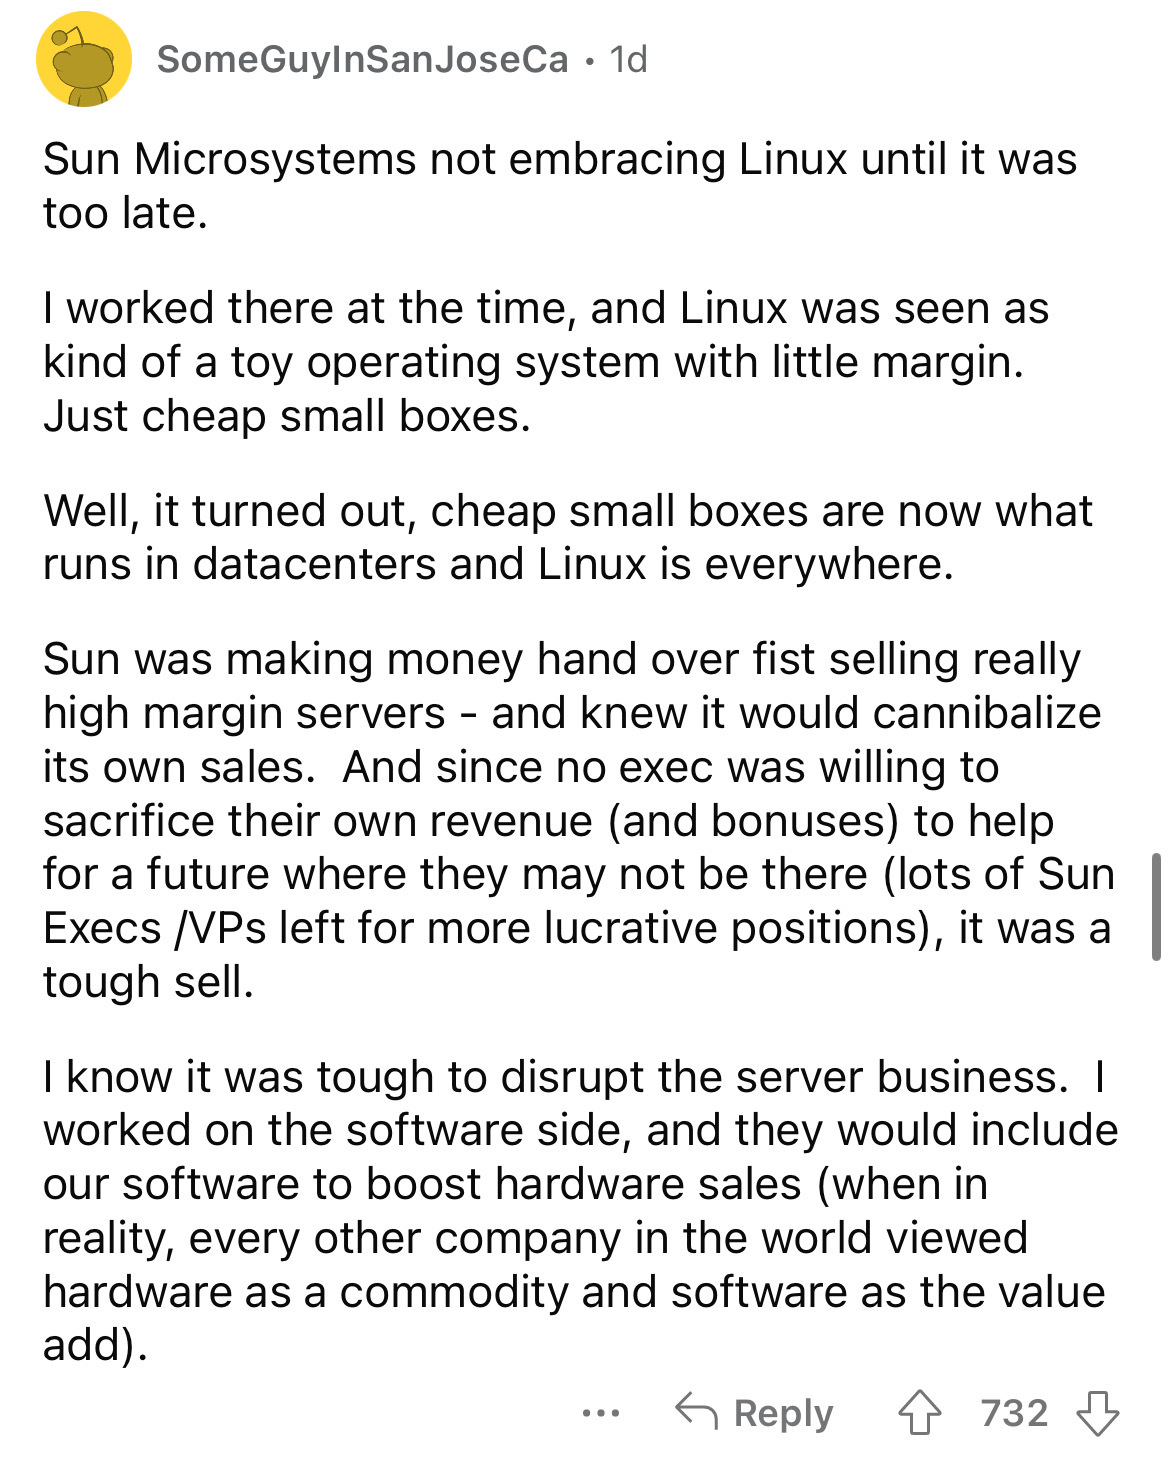 document - SomeGuyInSan JoseCa. 1d Sun Microsystems not embracing Linux until it was too late. I worked there at the time, and Linux was seen as kind of a toy operating system with little margin. Just cheap small boxes. Well, it turned out, cheap small bo